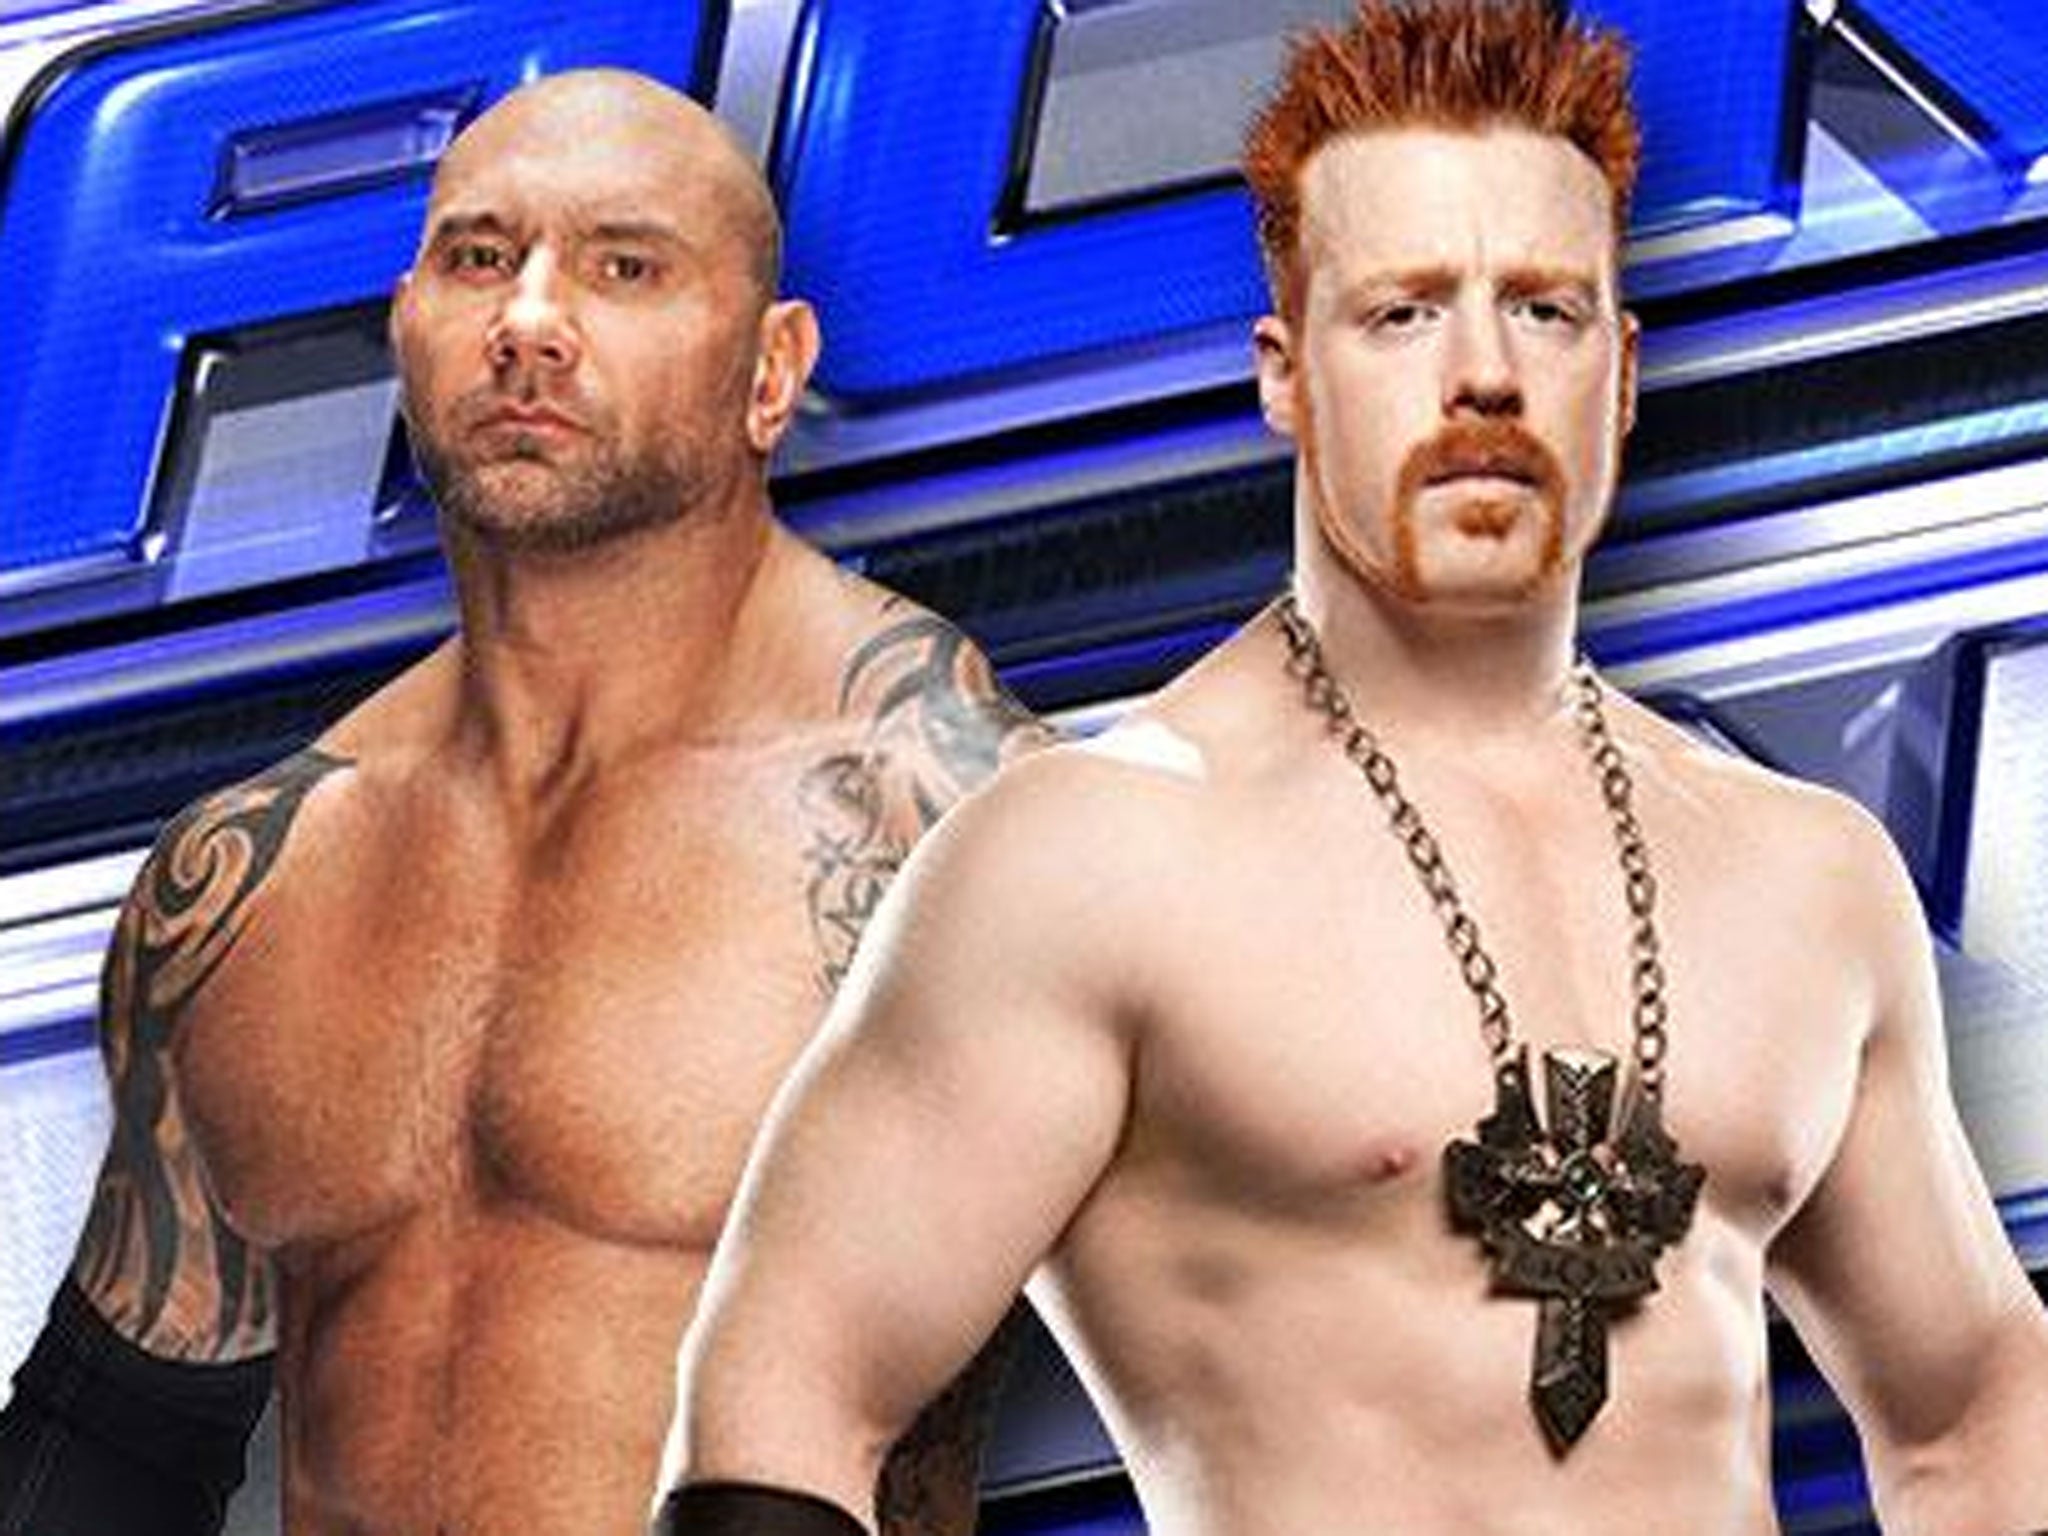 Batista and Sheamus square up on Smackdown